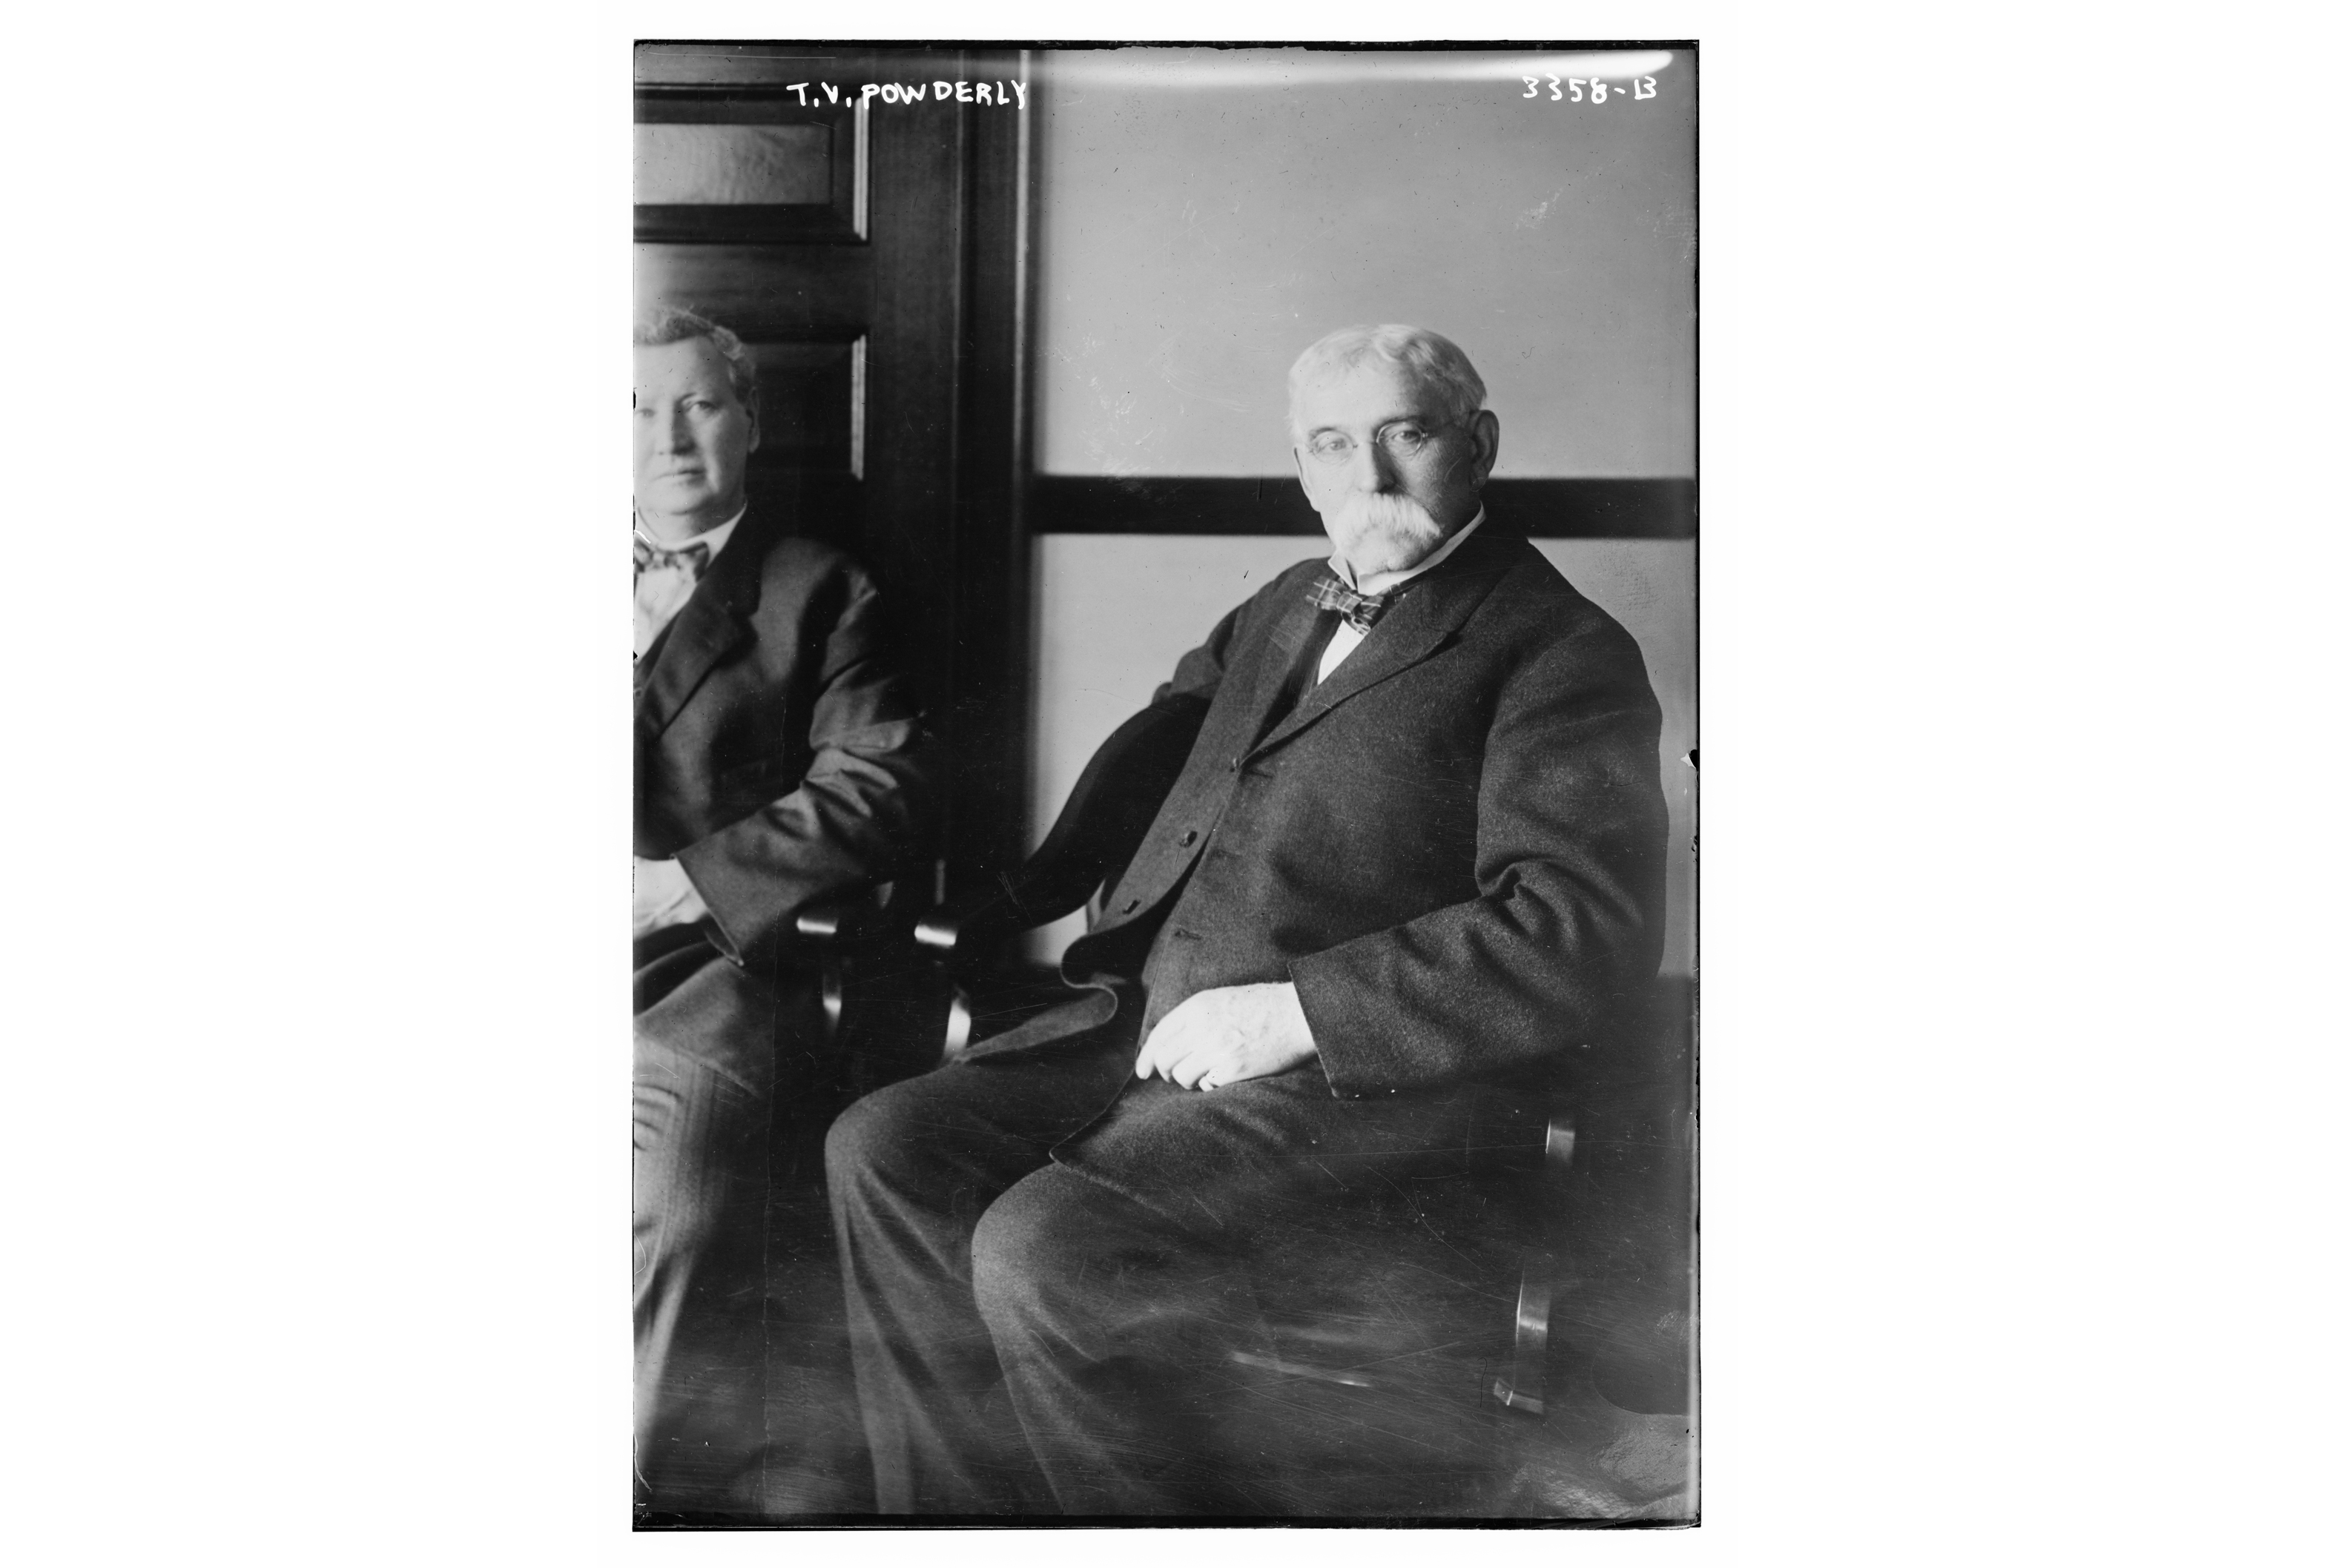 Terence V.  Powderly (1849-1924) who served as a labor union leader of the Knights of Labor  and later as Chief  Information Officer  for the U.S. Bureau of  Information from 1907 to 1921.  